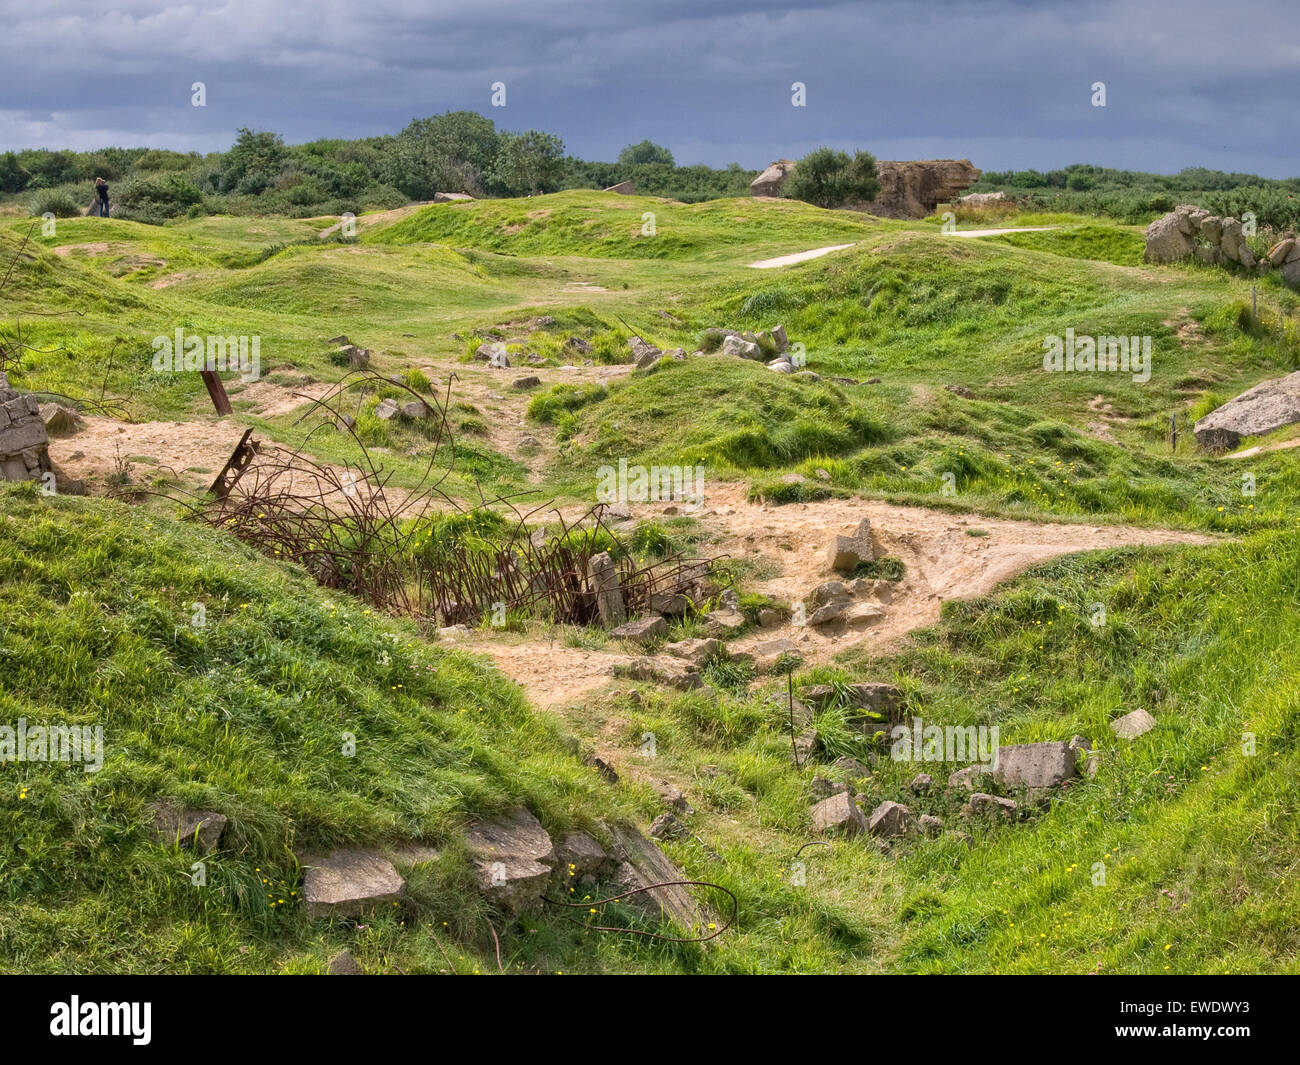 Normandy second world war battlefield of Pointe du Hoc. Landscape scarred with craters. Normandie. France. Stock Photo